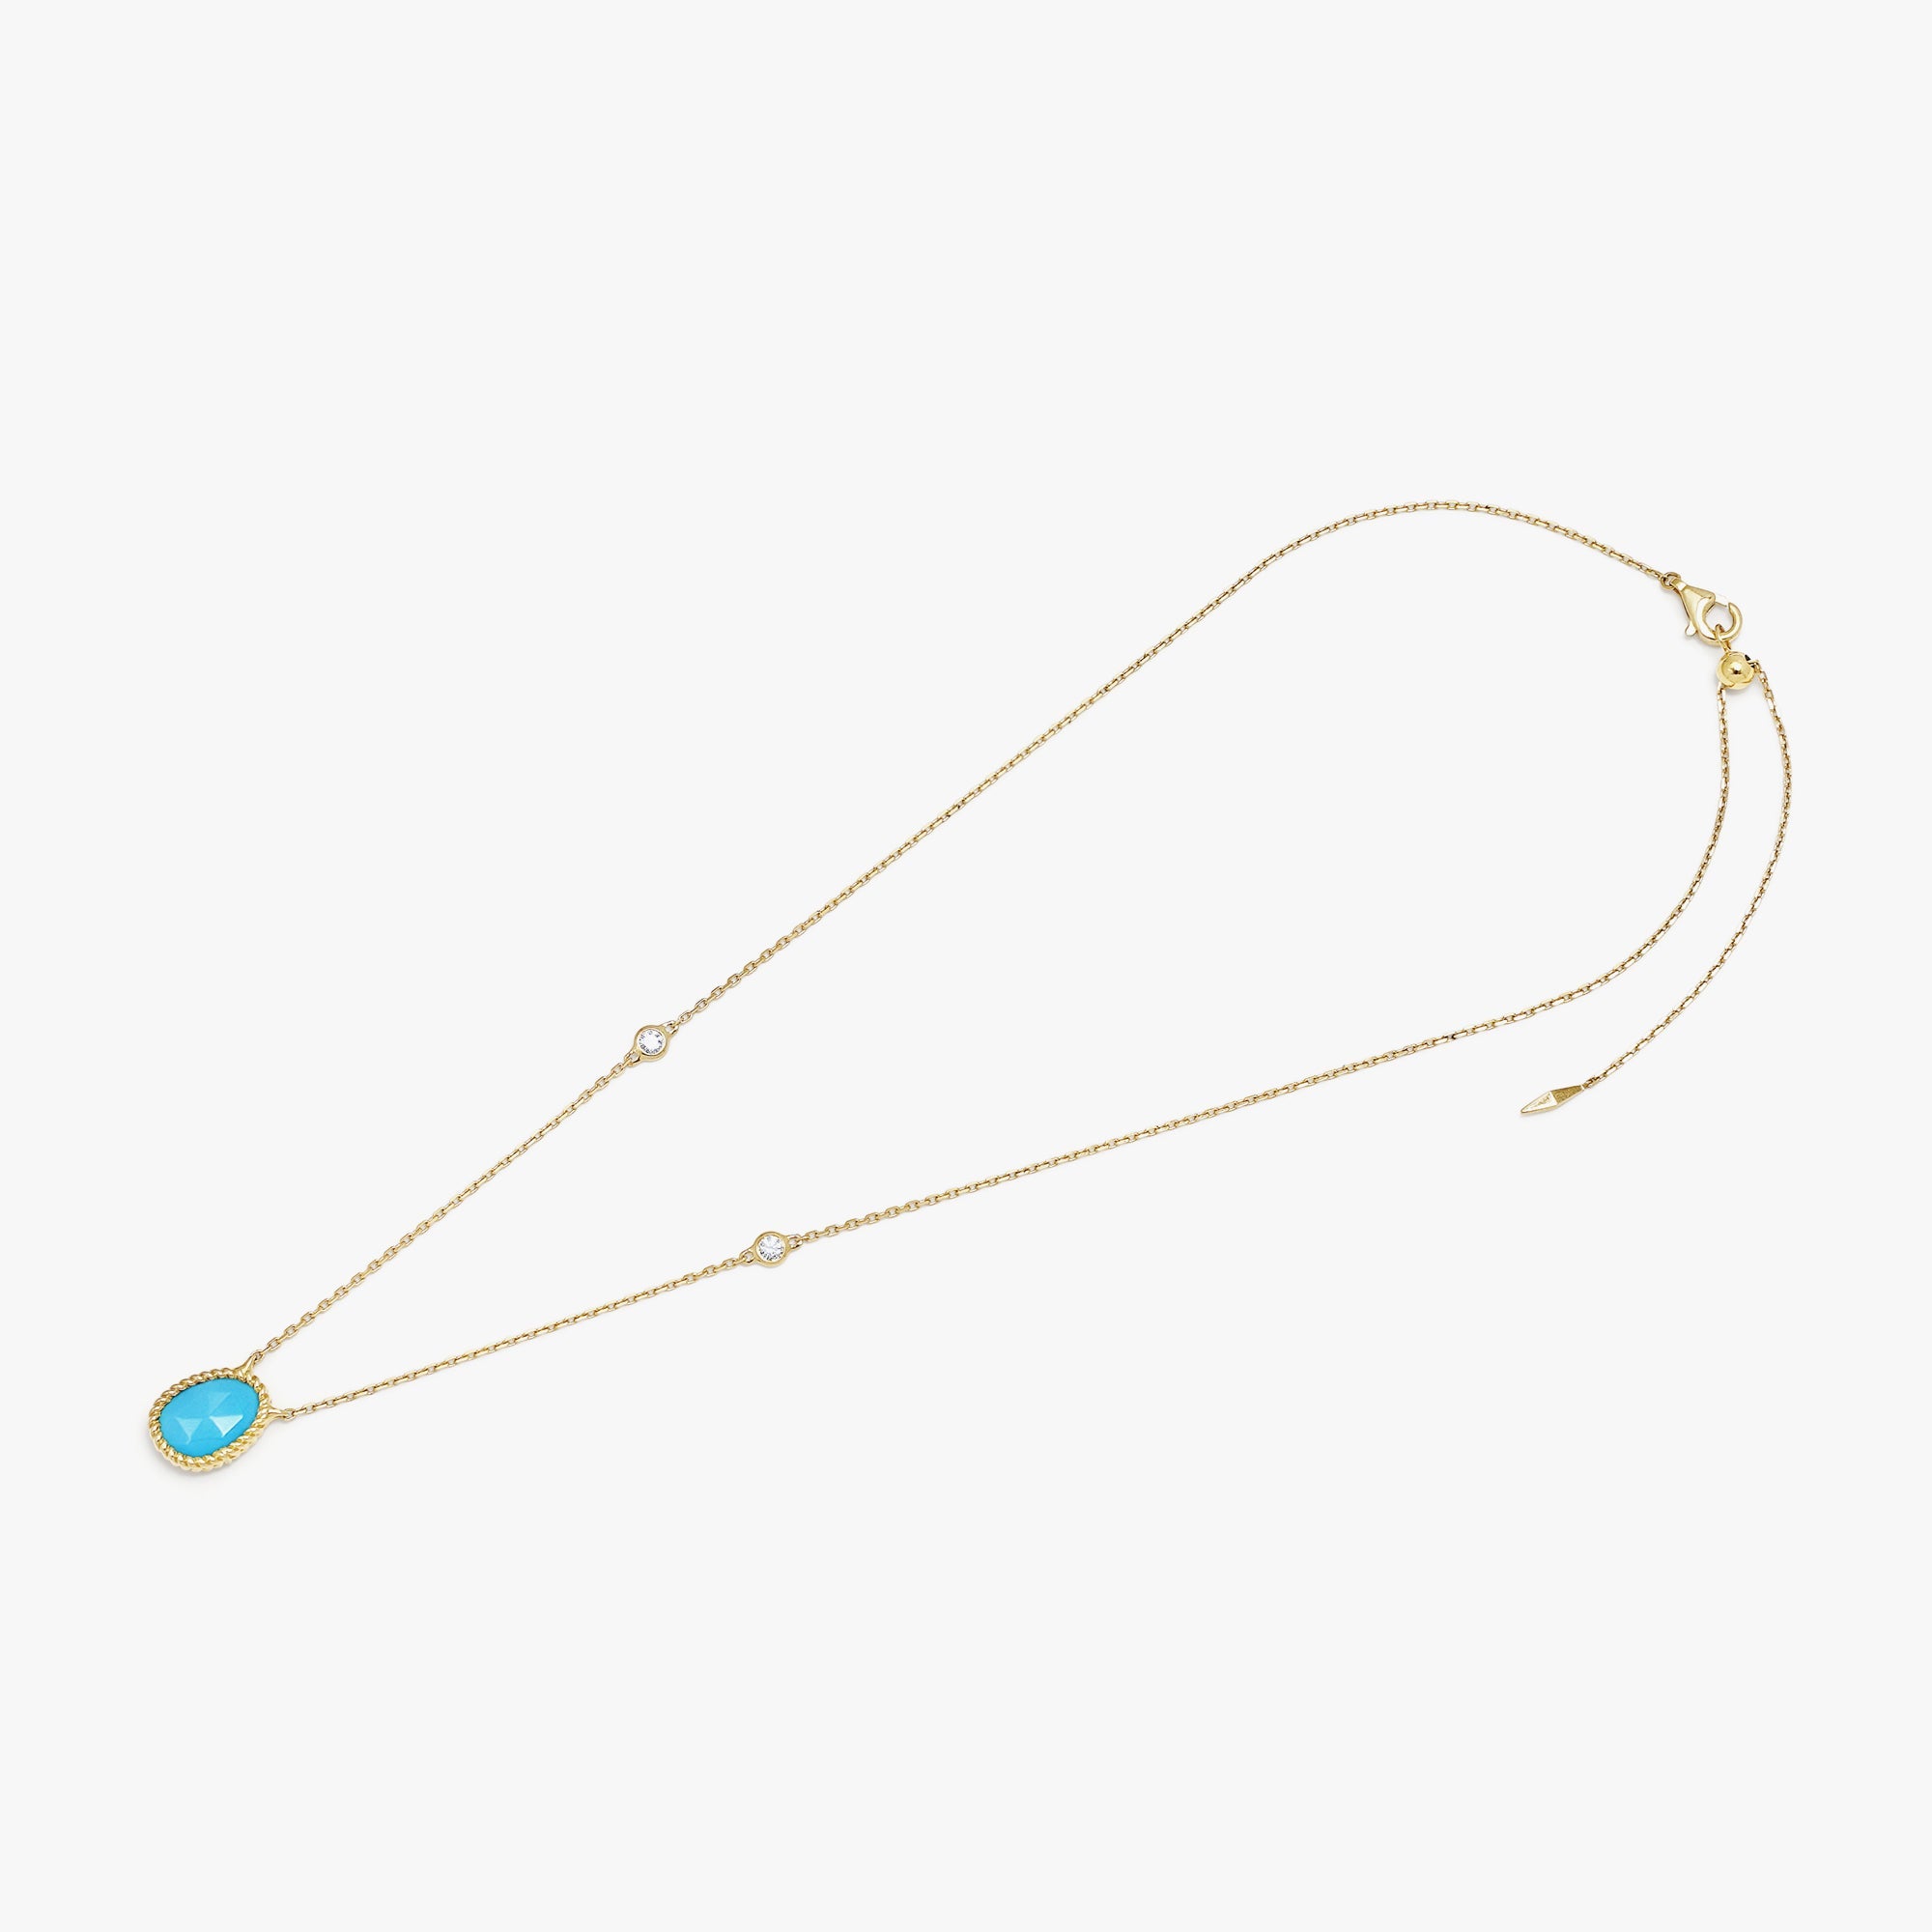 Nina Mariner Necklace In 18 Karat Yellow Gold With Natural White Diamonds And Turquoise Stone